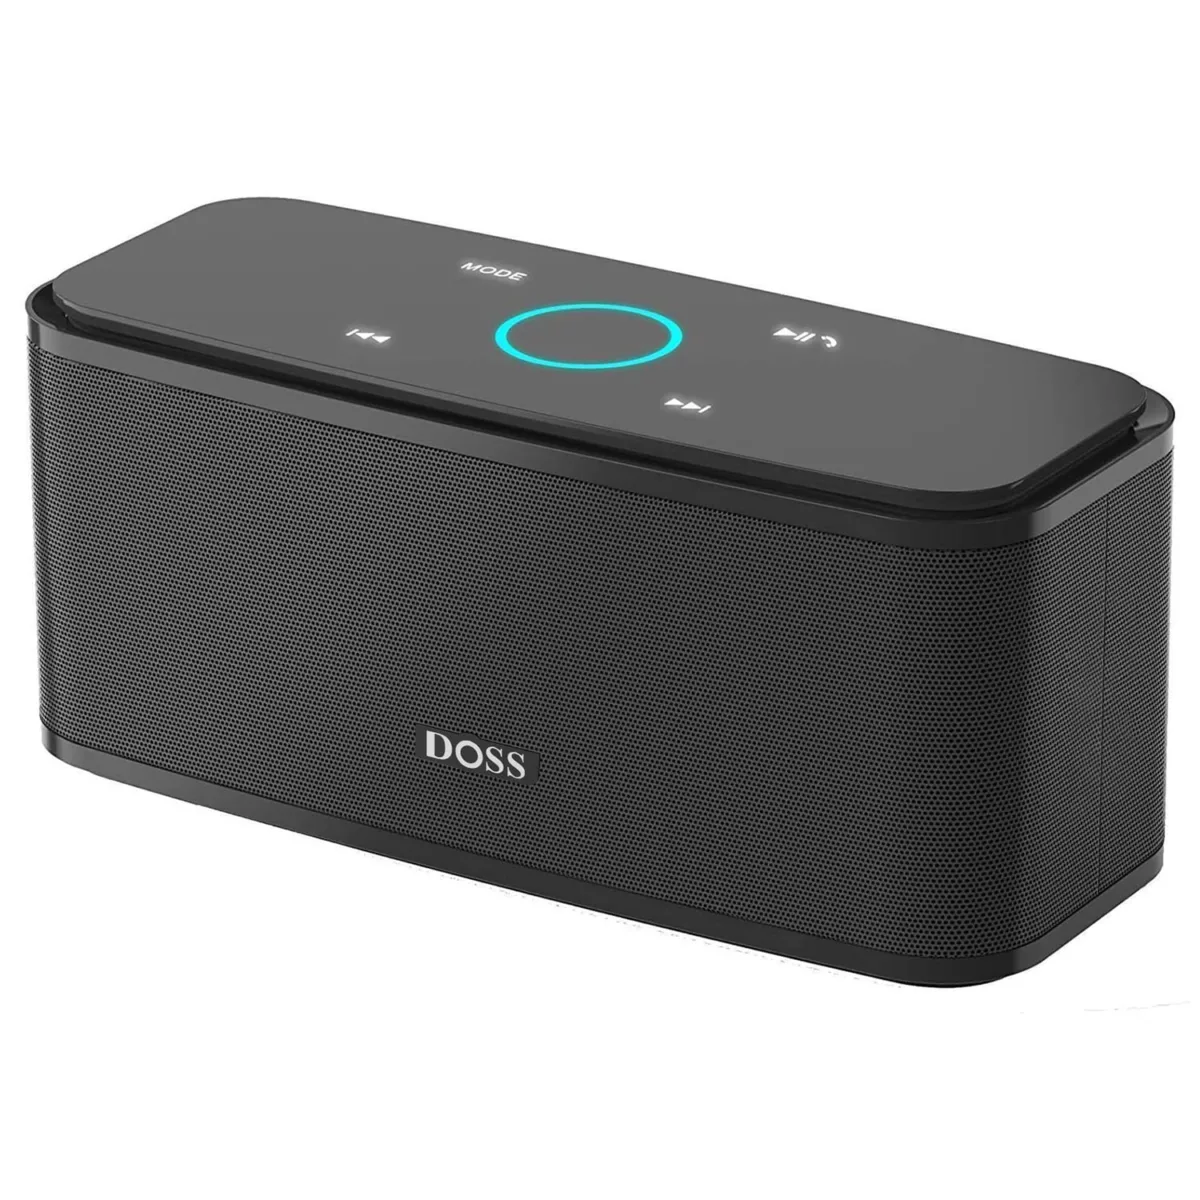 Experience Ultimate Portability with the DOSS SoundBox 1